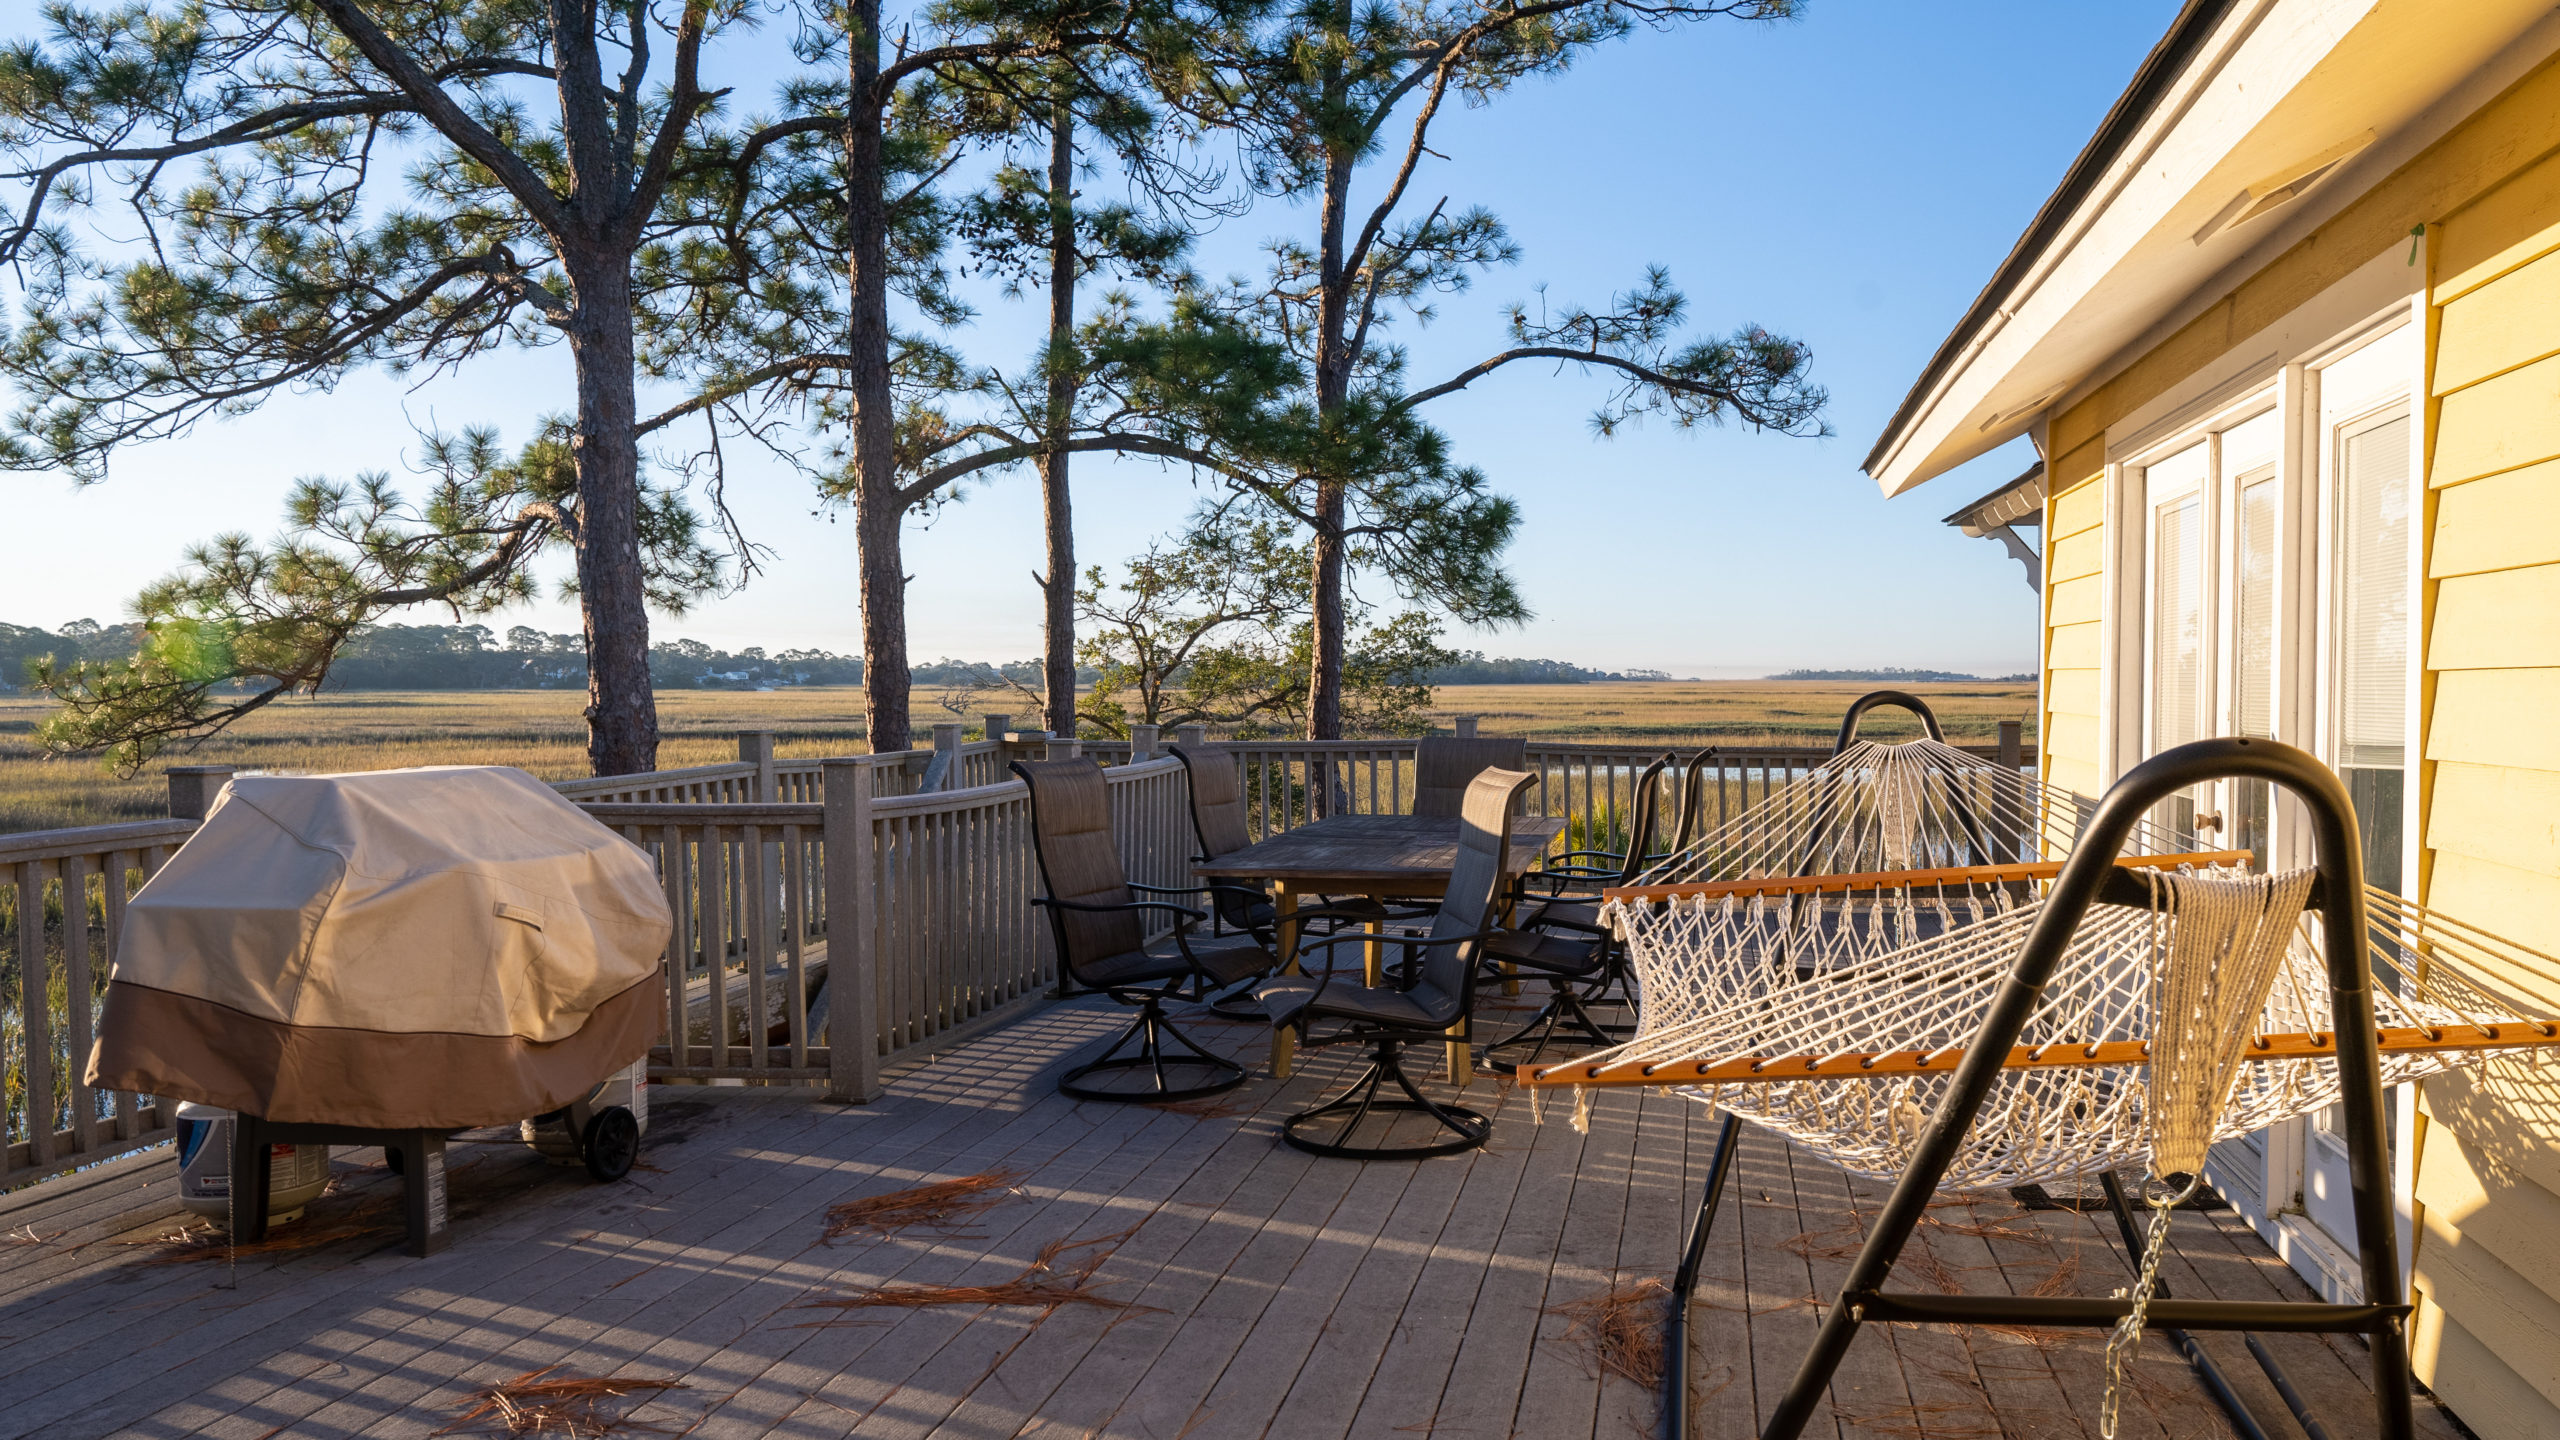 Deck with hammock and chairs overlooking wetlands in Georgia